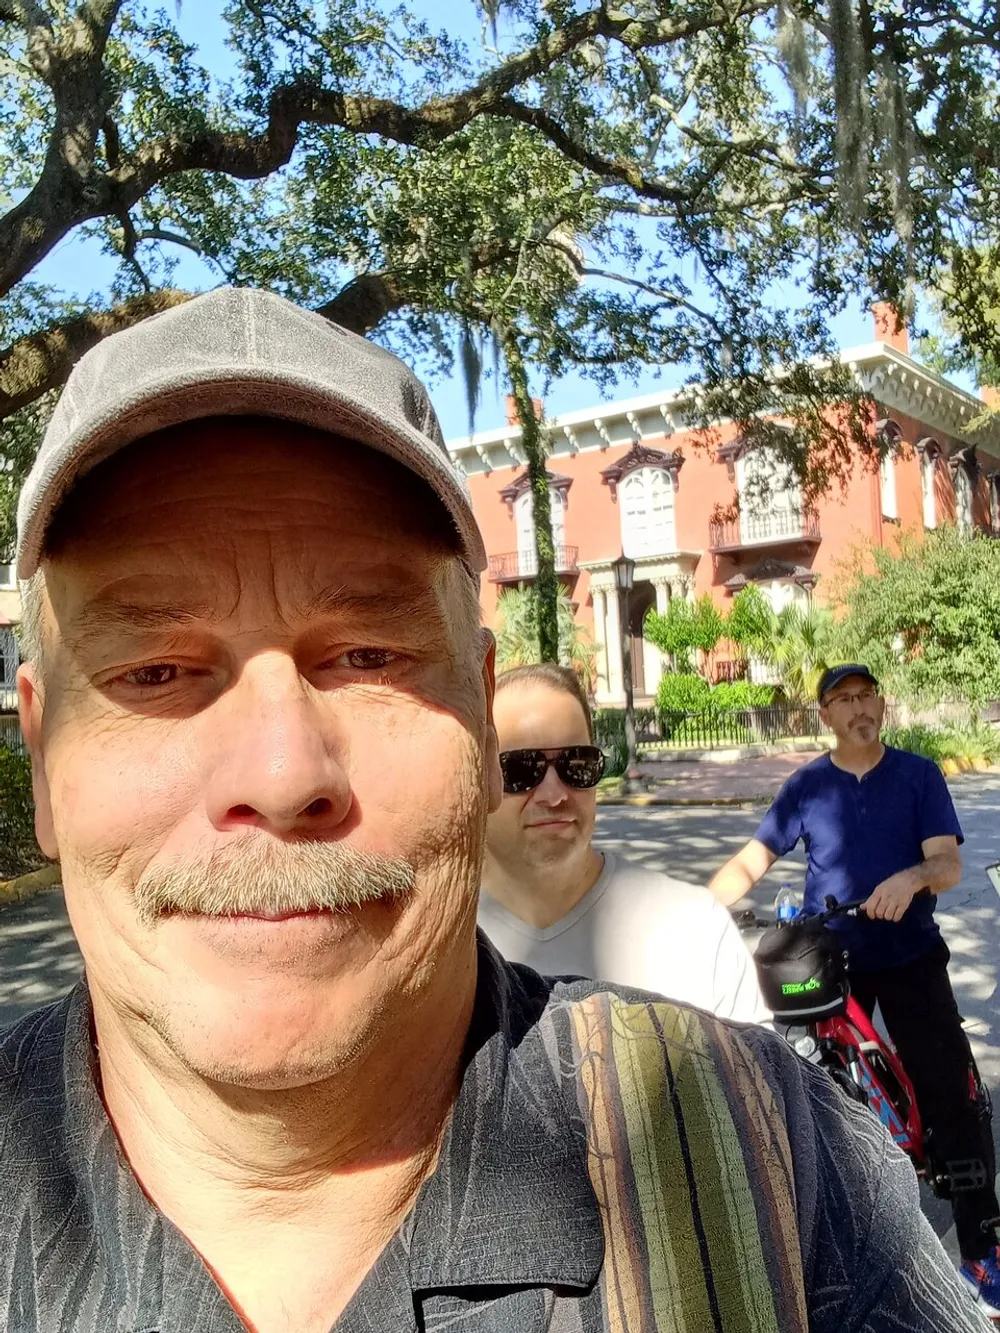 A person is taking a selfie with two other individuals on bicycles in the background in what appears to be a sunny outdoor setting with trees and a red building